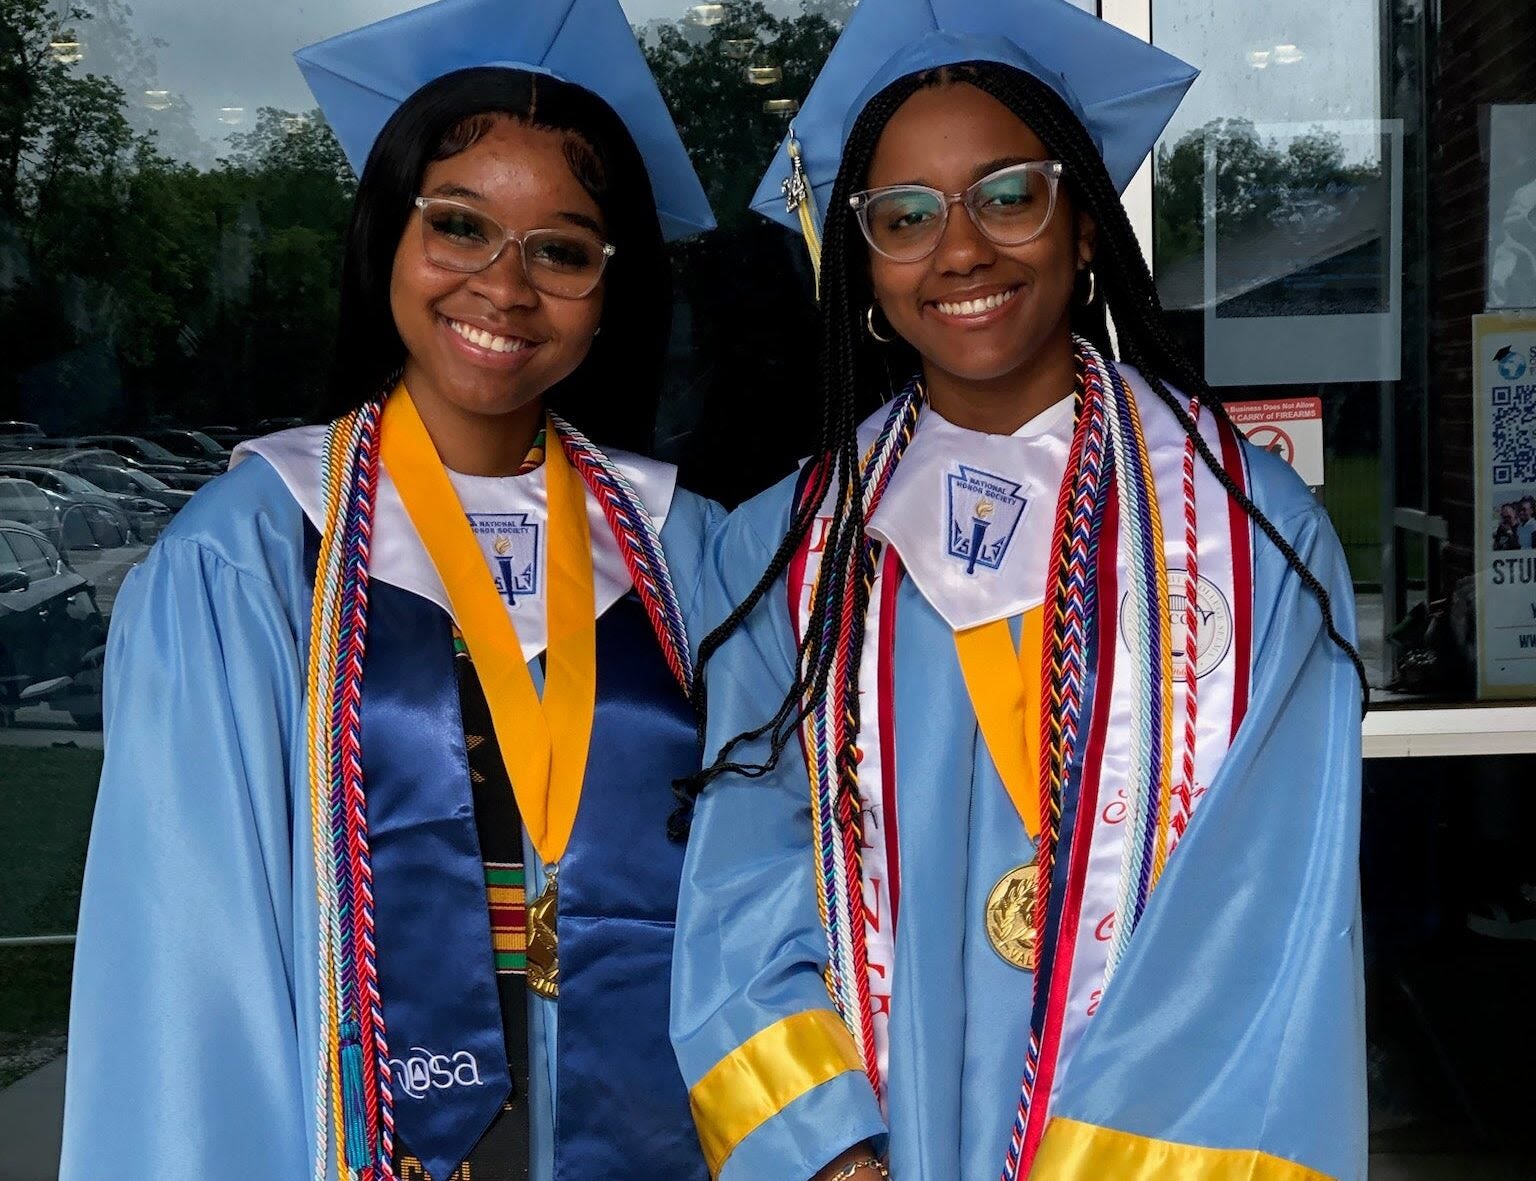 Selma High overcame rainy conditions for stellar graduation - The Selma Times‑Journal